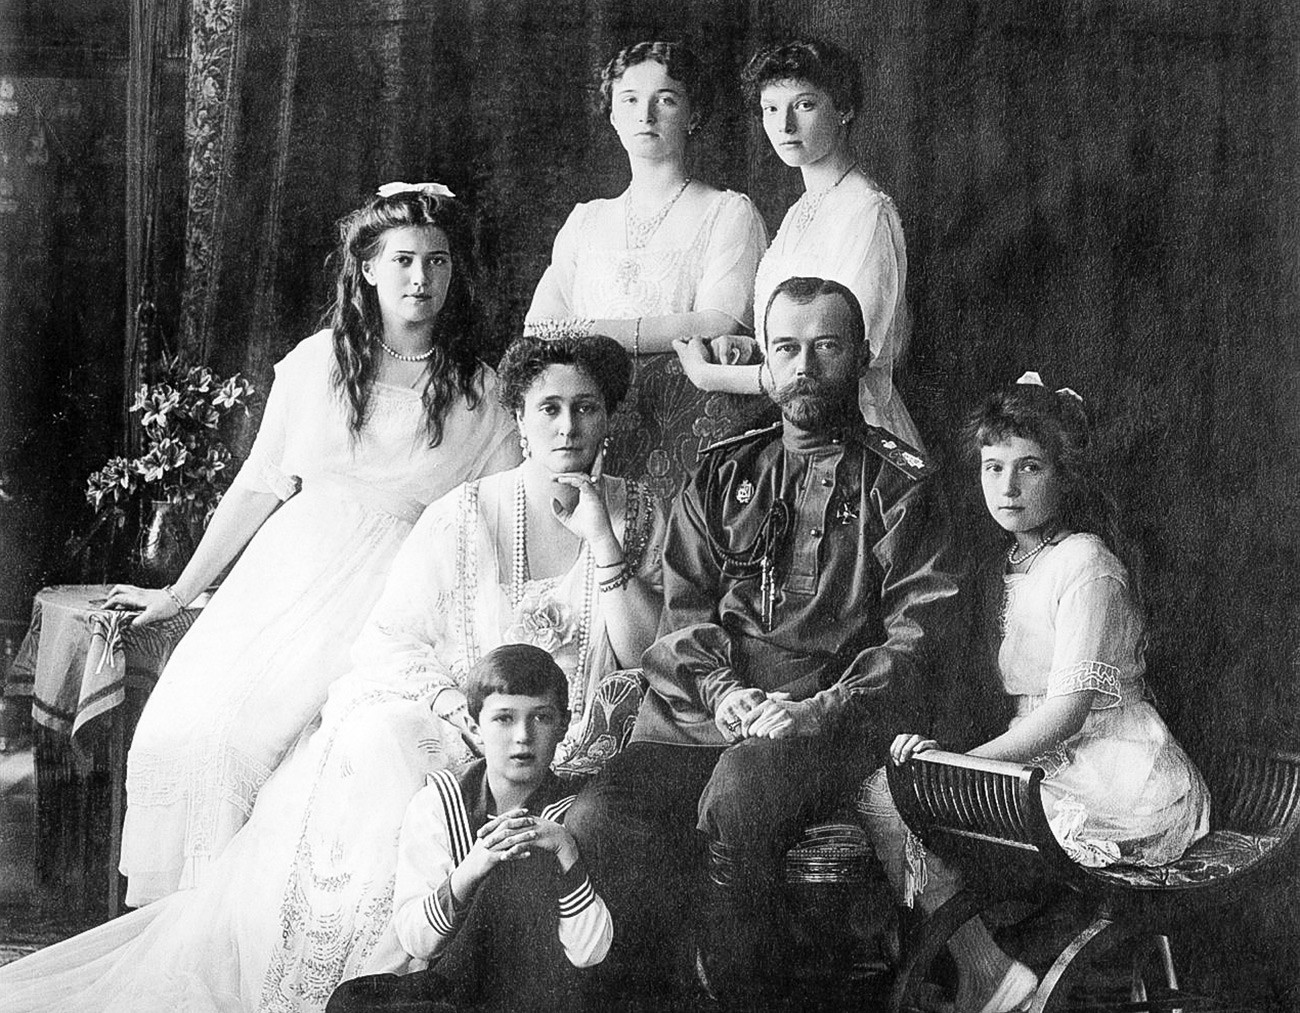 Emperor Nicholas II with his spouse, Alix of Gessen (baptized to Orthodoxy as Alexandra Fedorovna) and their children.